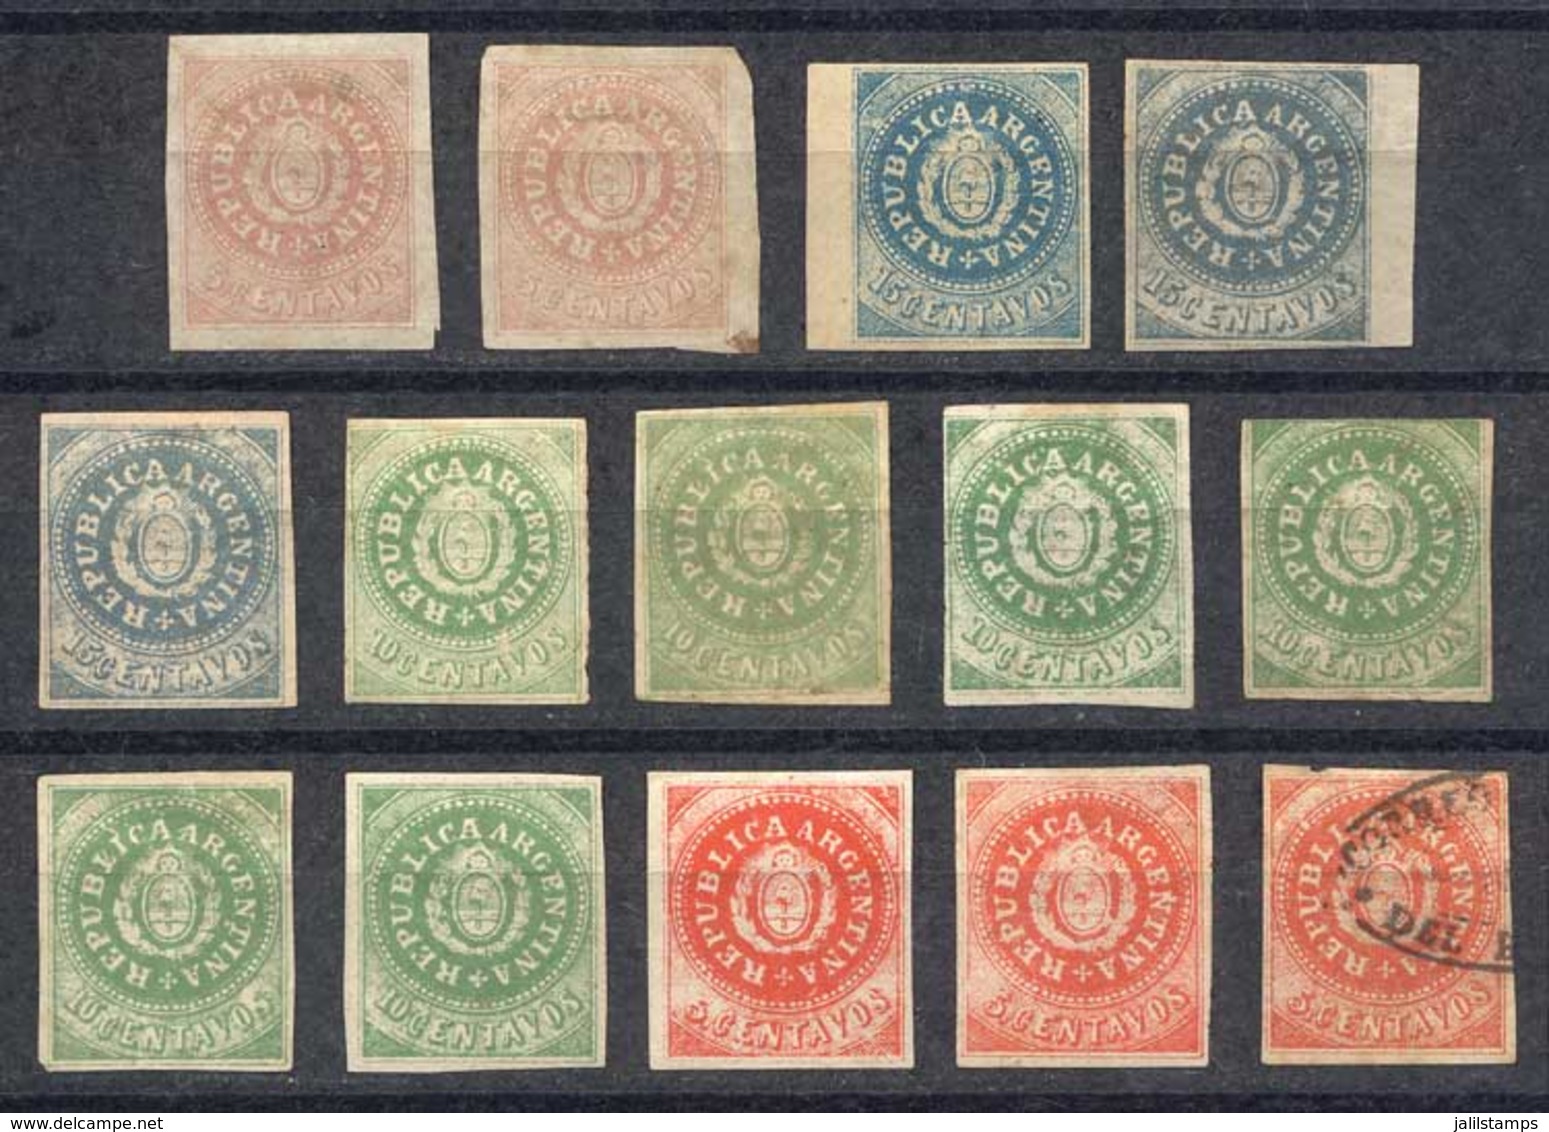 ARGENTINA: Lot Of Stamp FORGERIES, Some Are Very Well Made, Interesting Group To Study And Compare! - Ongebruikt